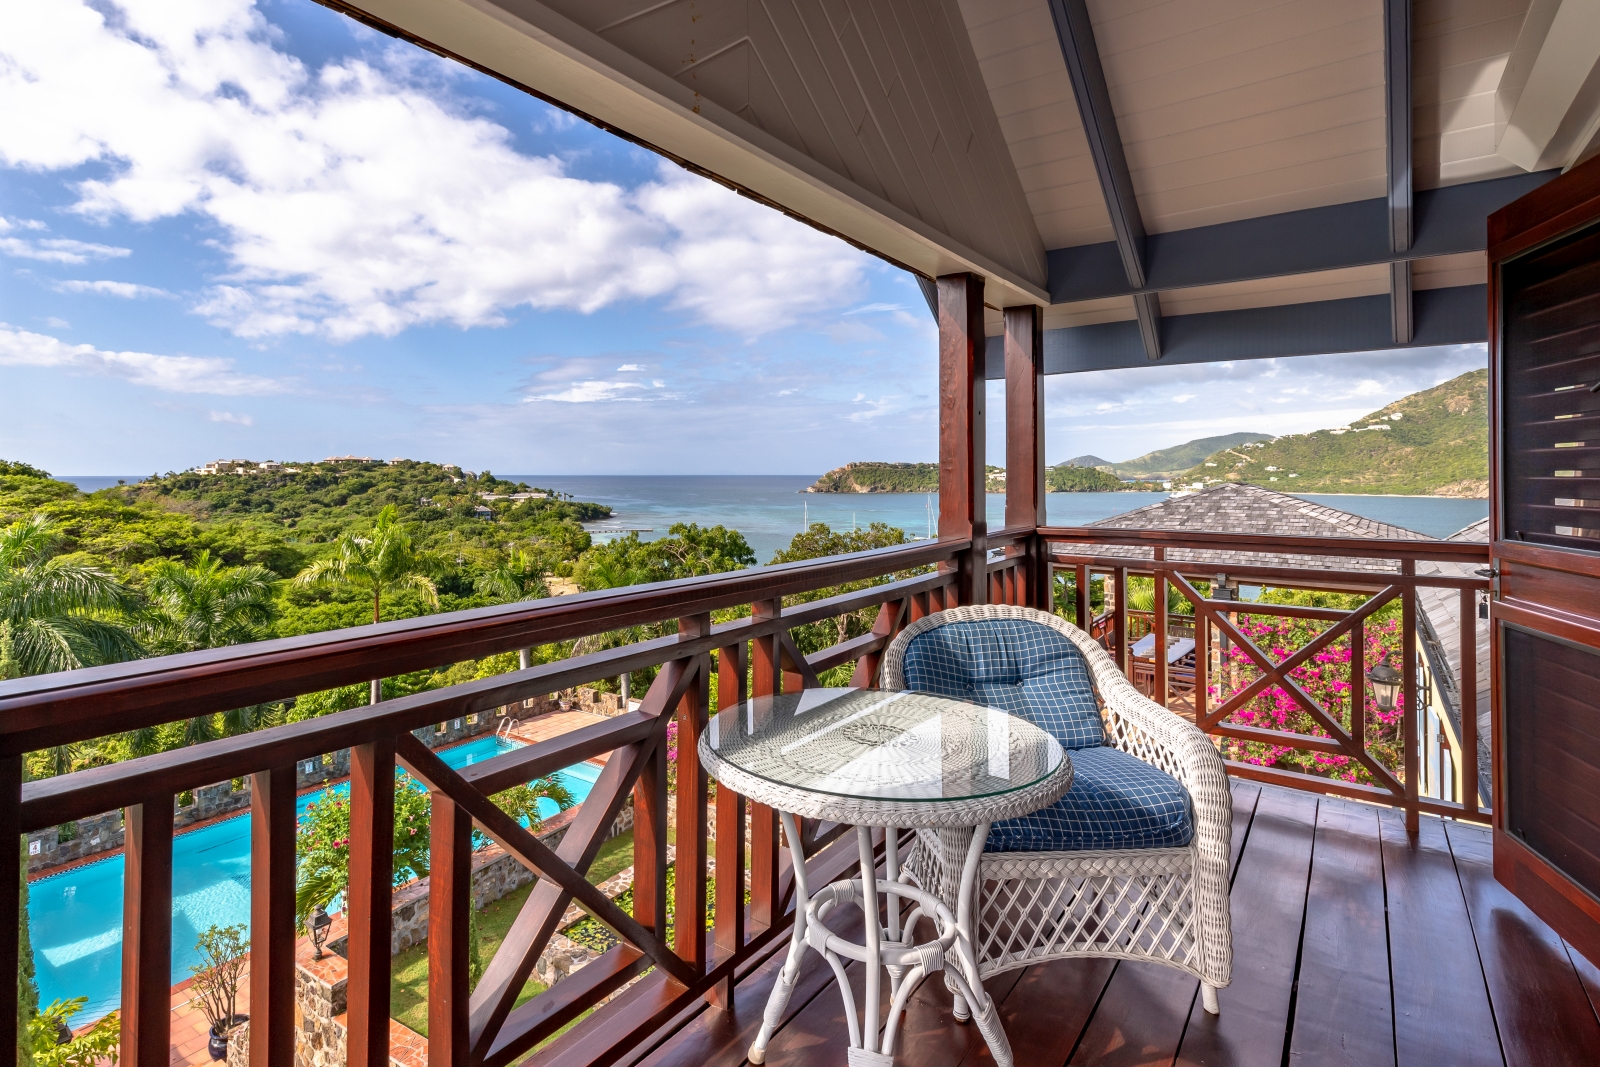 Balcony with comfy chair, table and sea view at St Anne’s Point in Antigua, the Caribbean